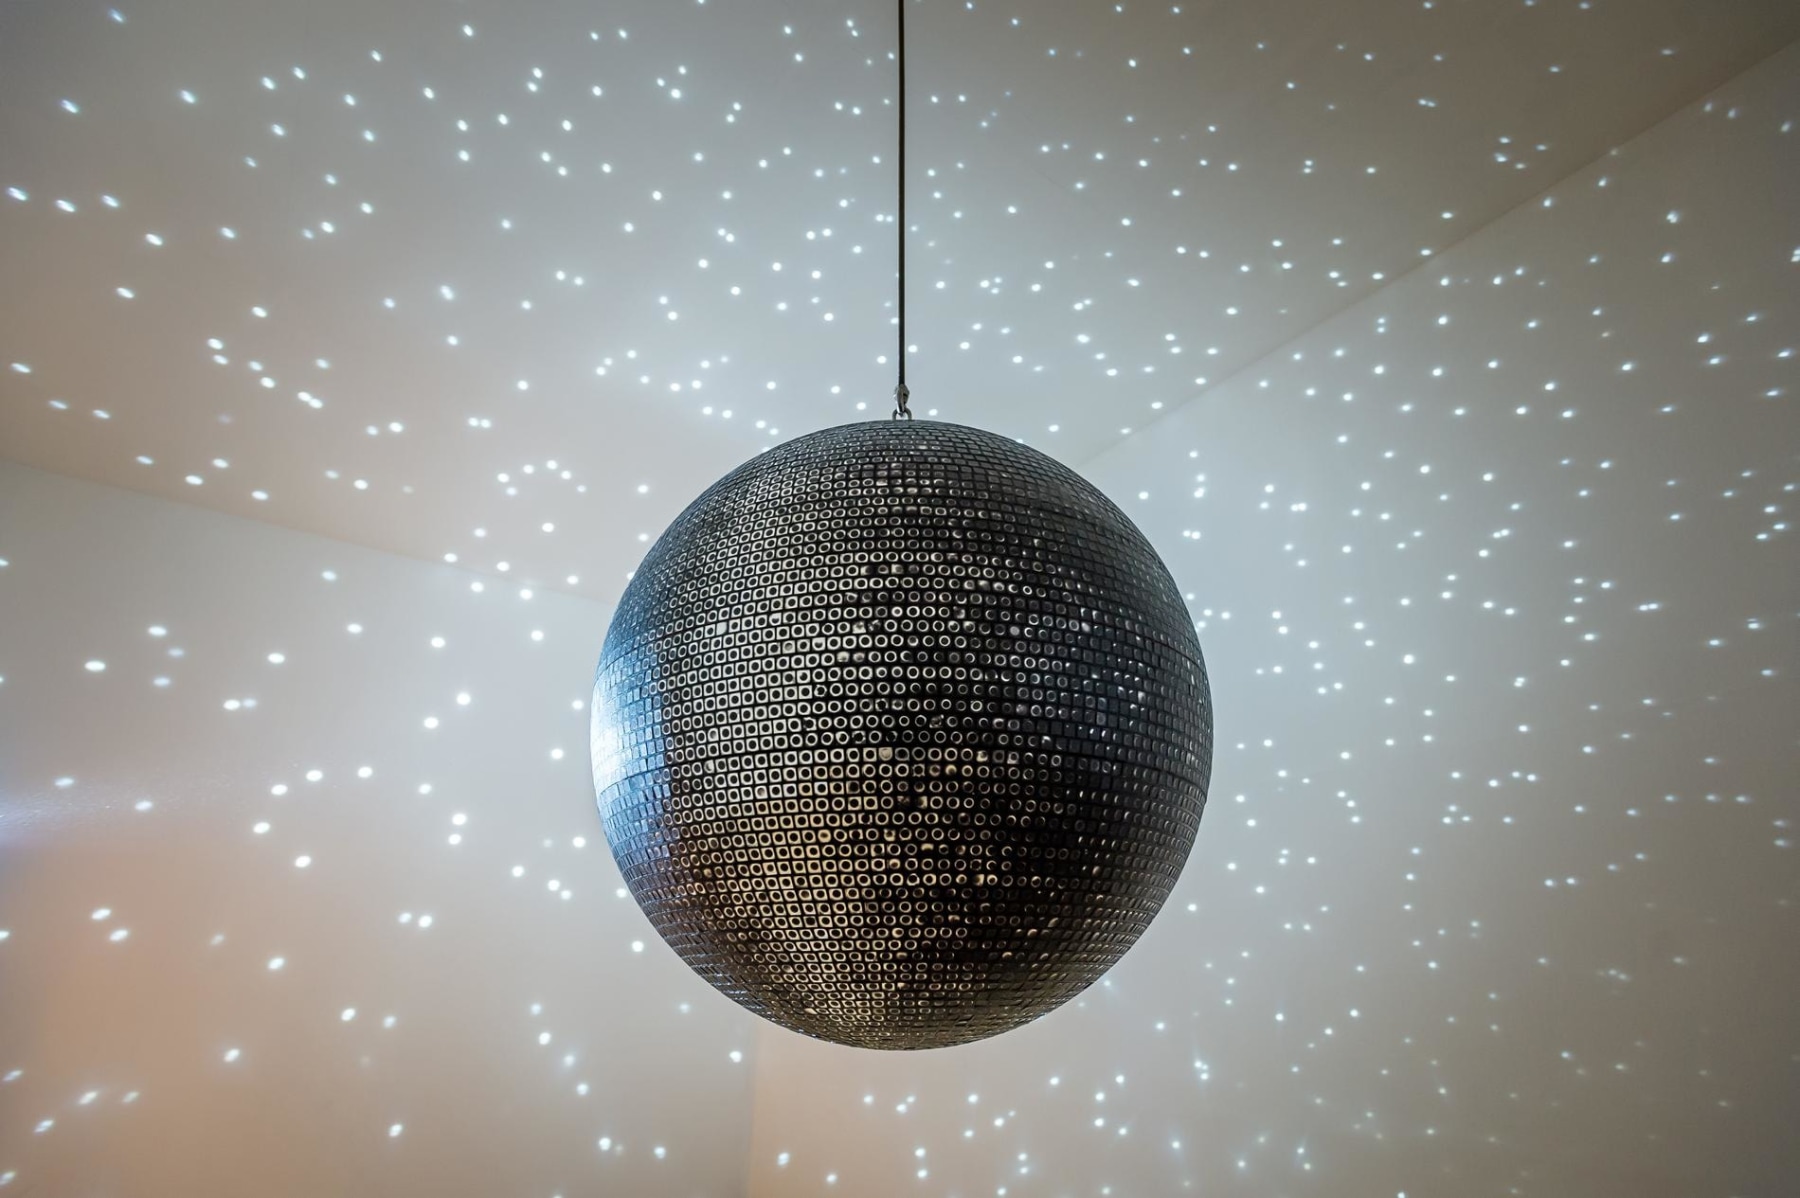 Image of KATIE PATERSON's Totality, 2016